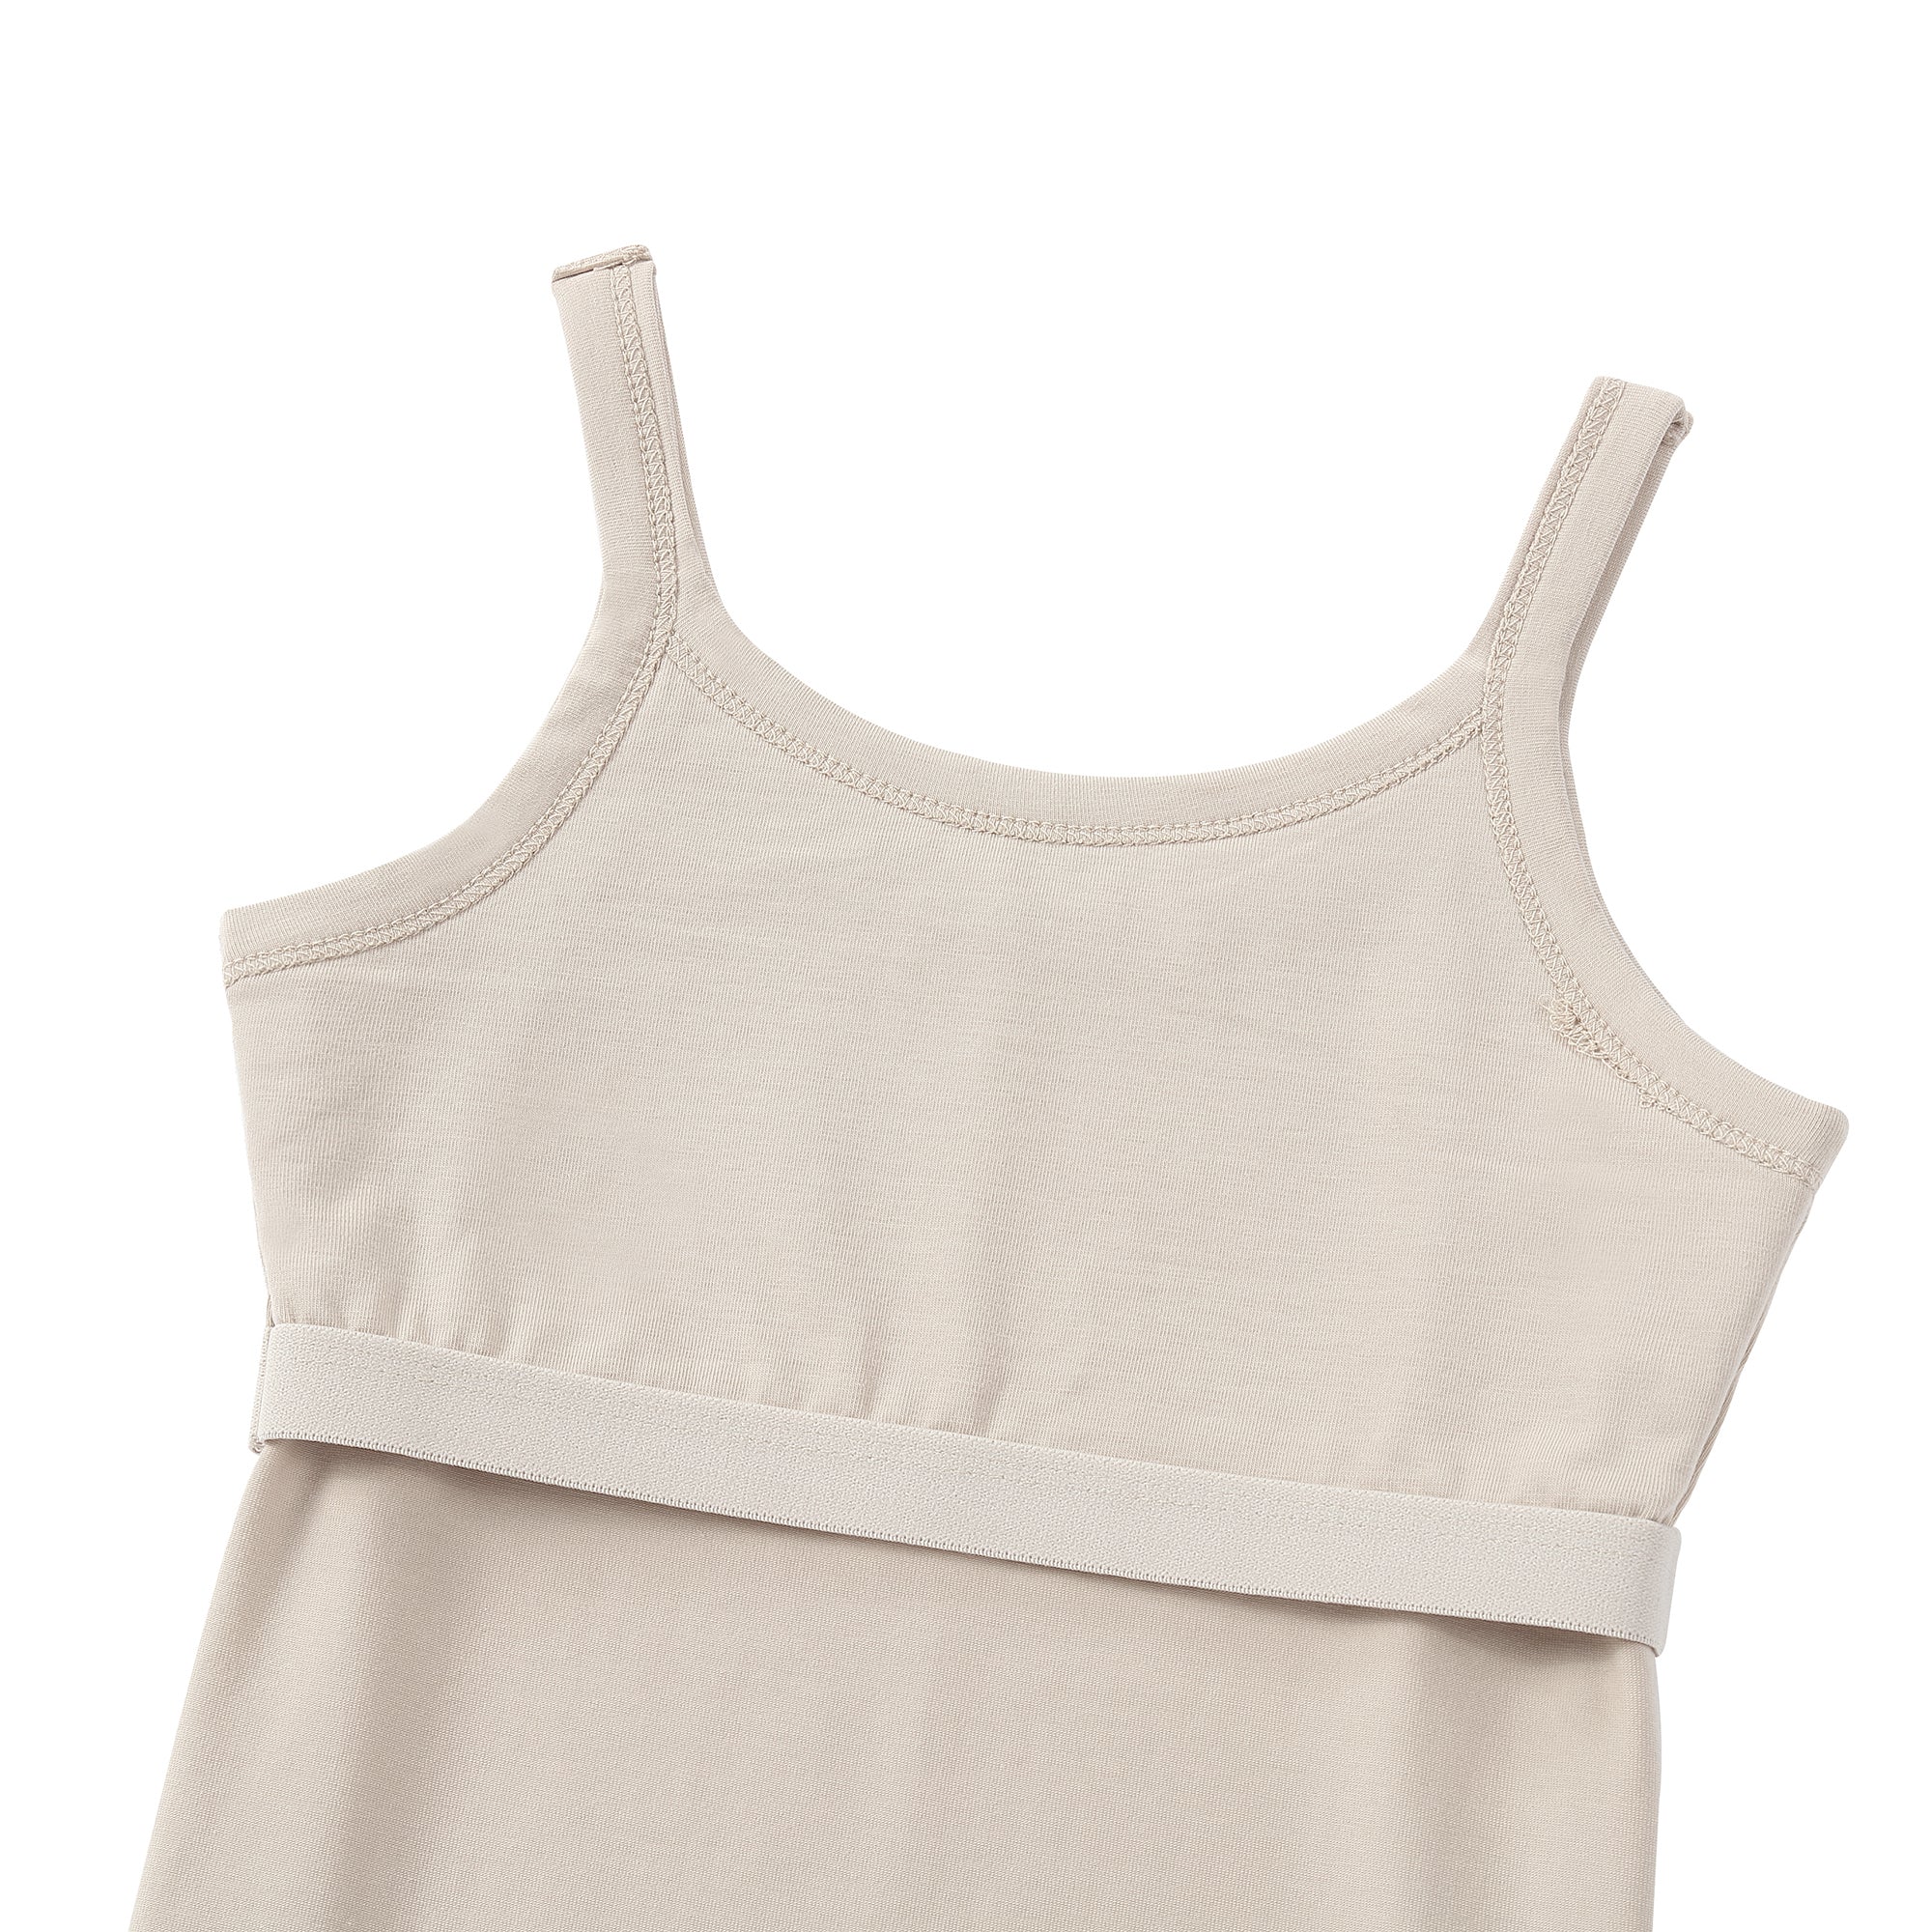 Teen Jersey 2pc Camisole with Support - Tan